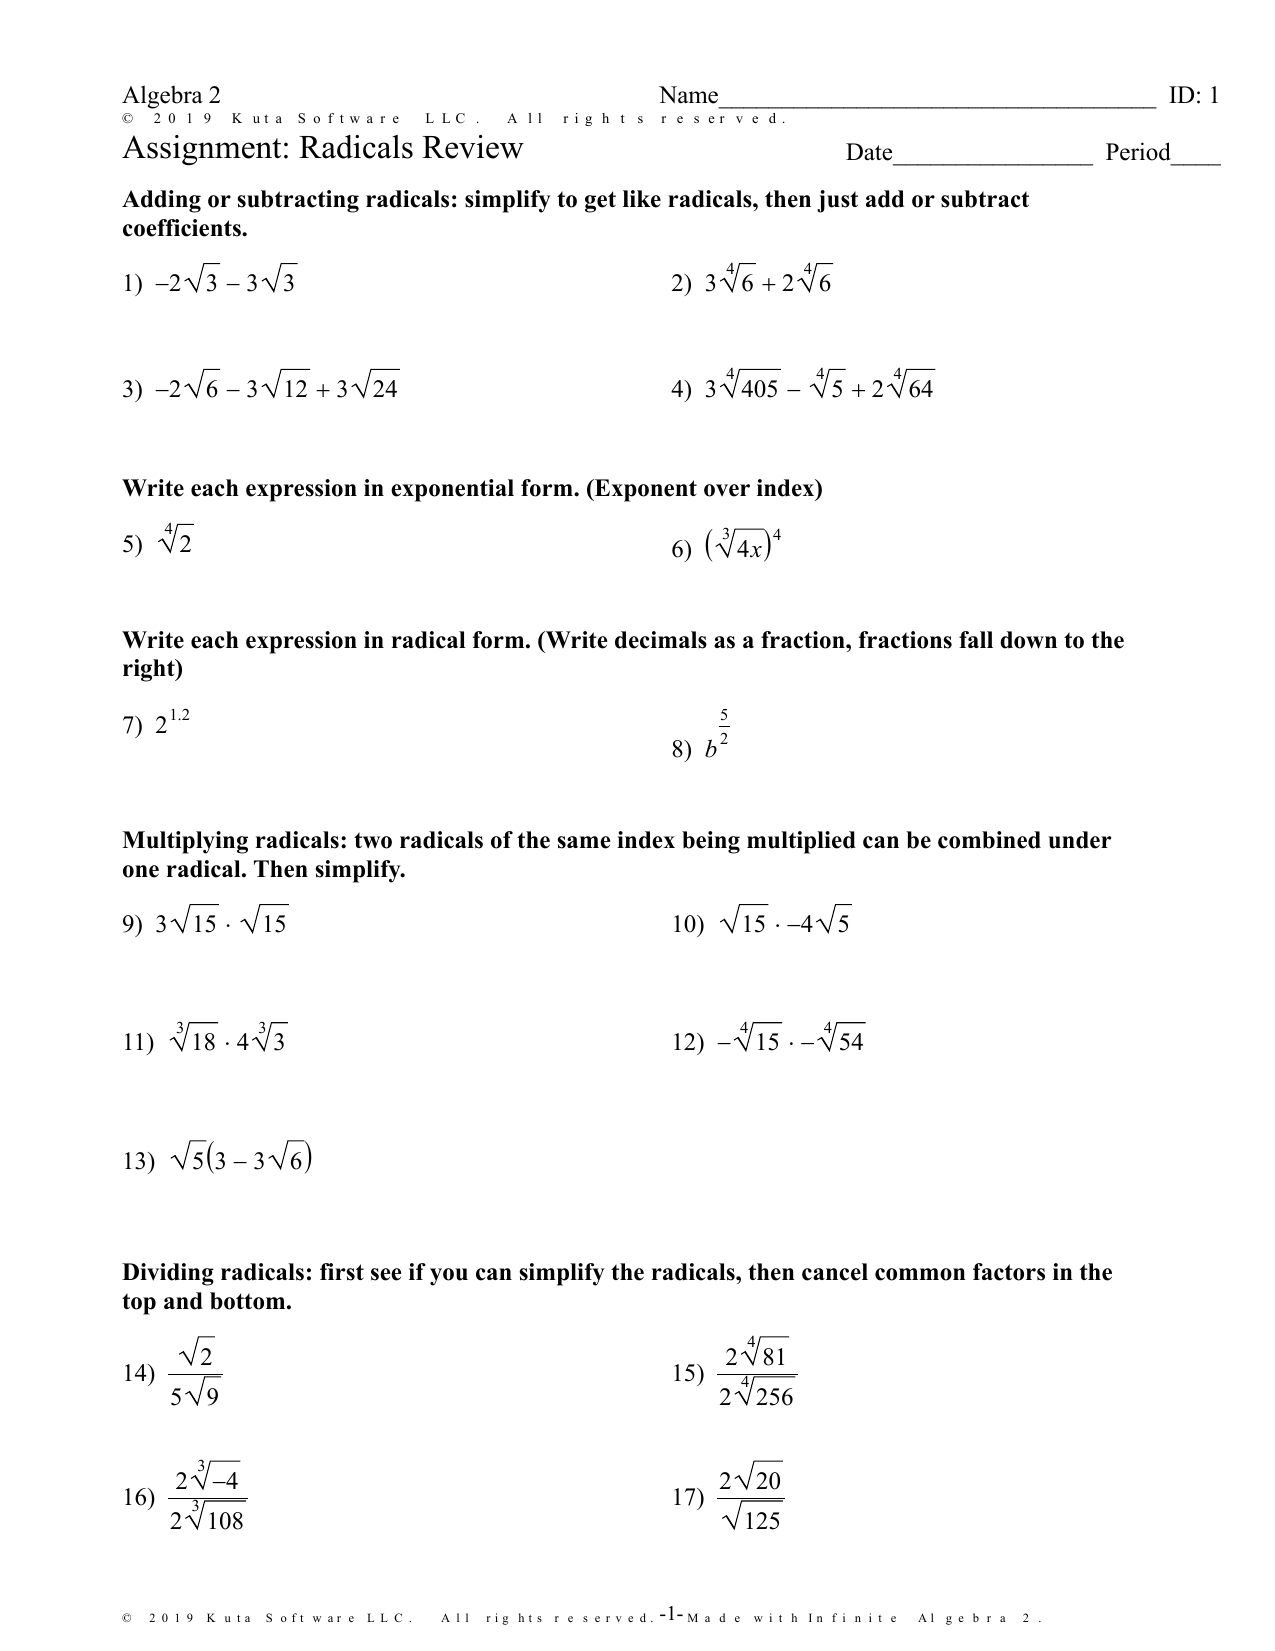 Radicals and Rational Exponents Review With Radical And Rational Exponents Worksheet